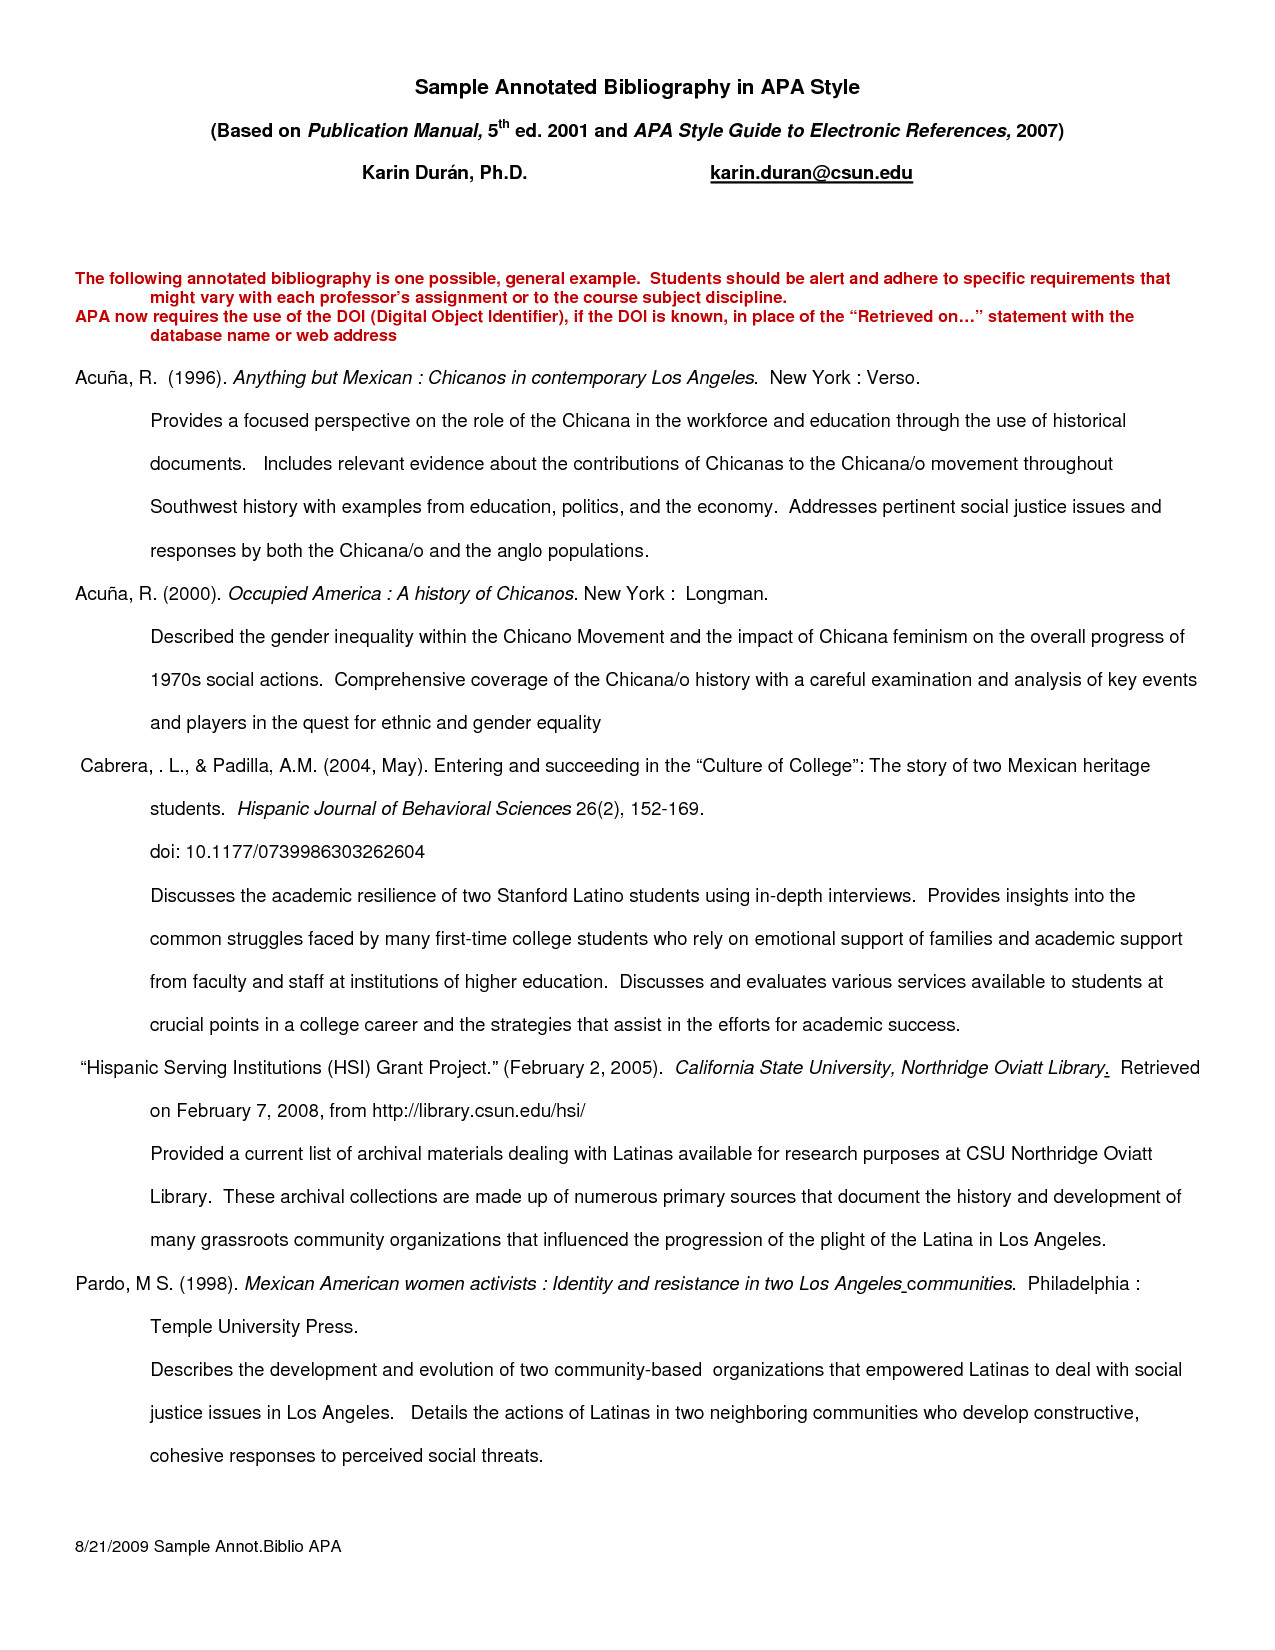 post example of annotated bibliography apa style 82053